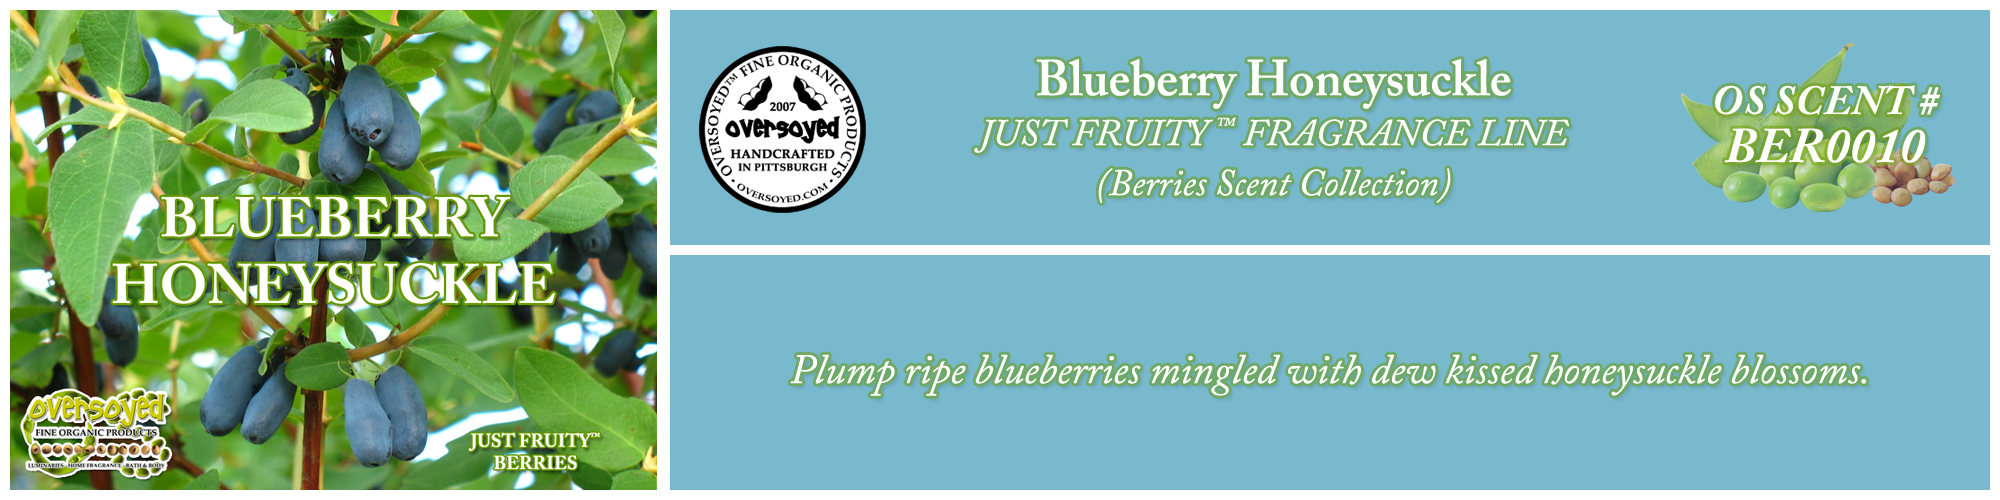 Blueberry Honeysuckle Handcrafted Products Collection